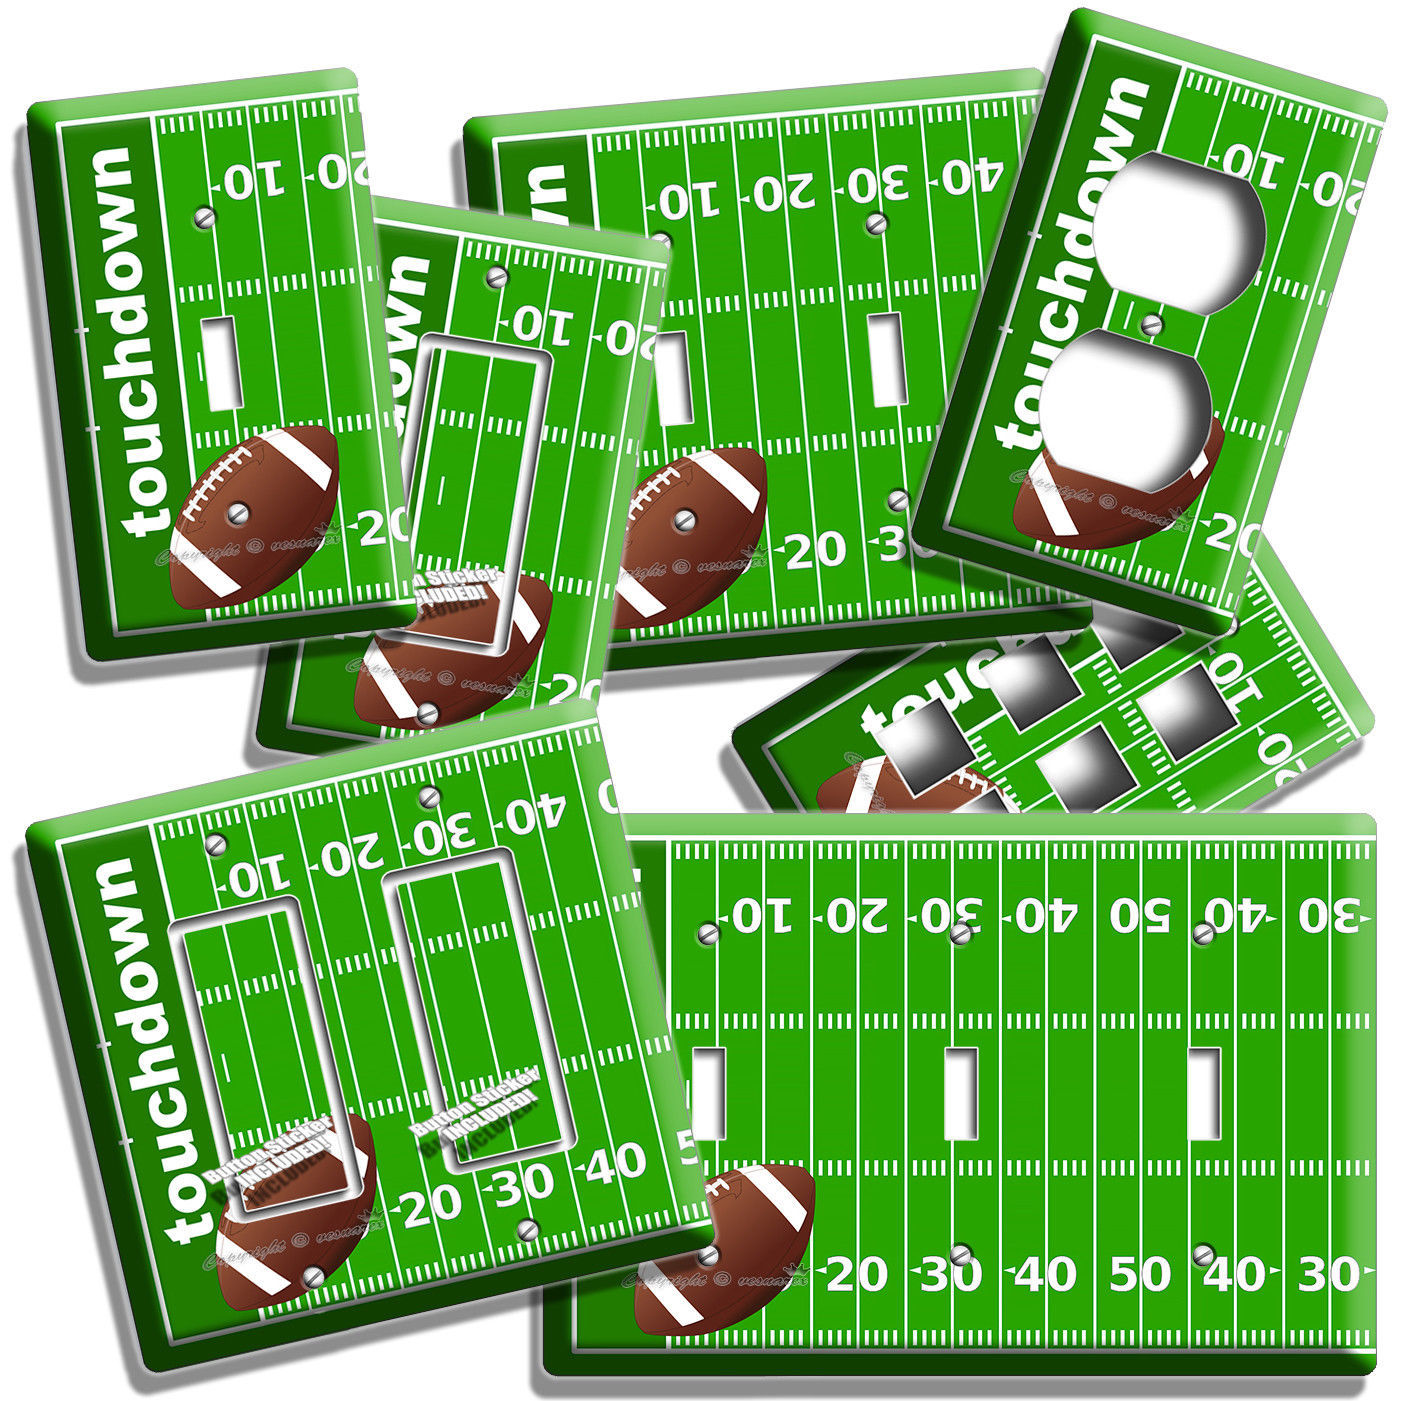 FOOTBALL FIELD AERIAL TOUCHDOWN LIGHT SWITCH OUTLET WALL PLATE MAN CAVE HD DECOR